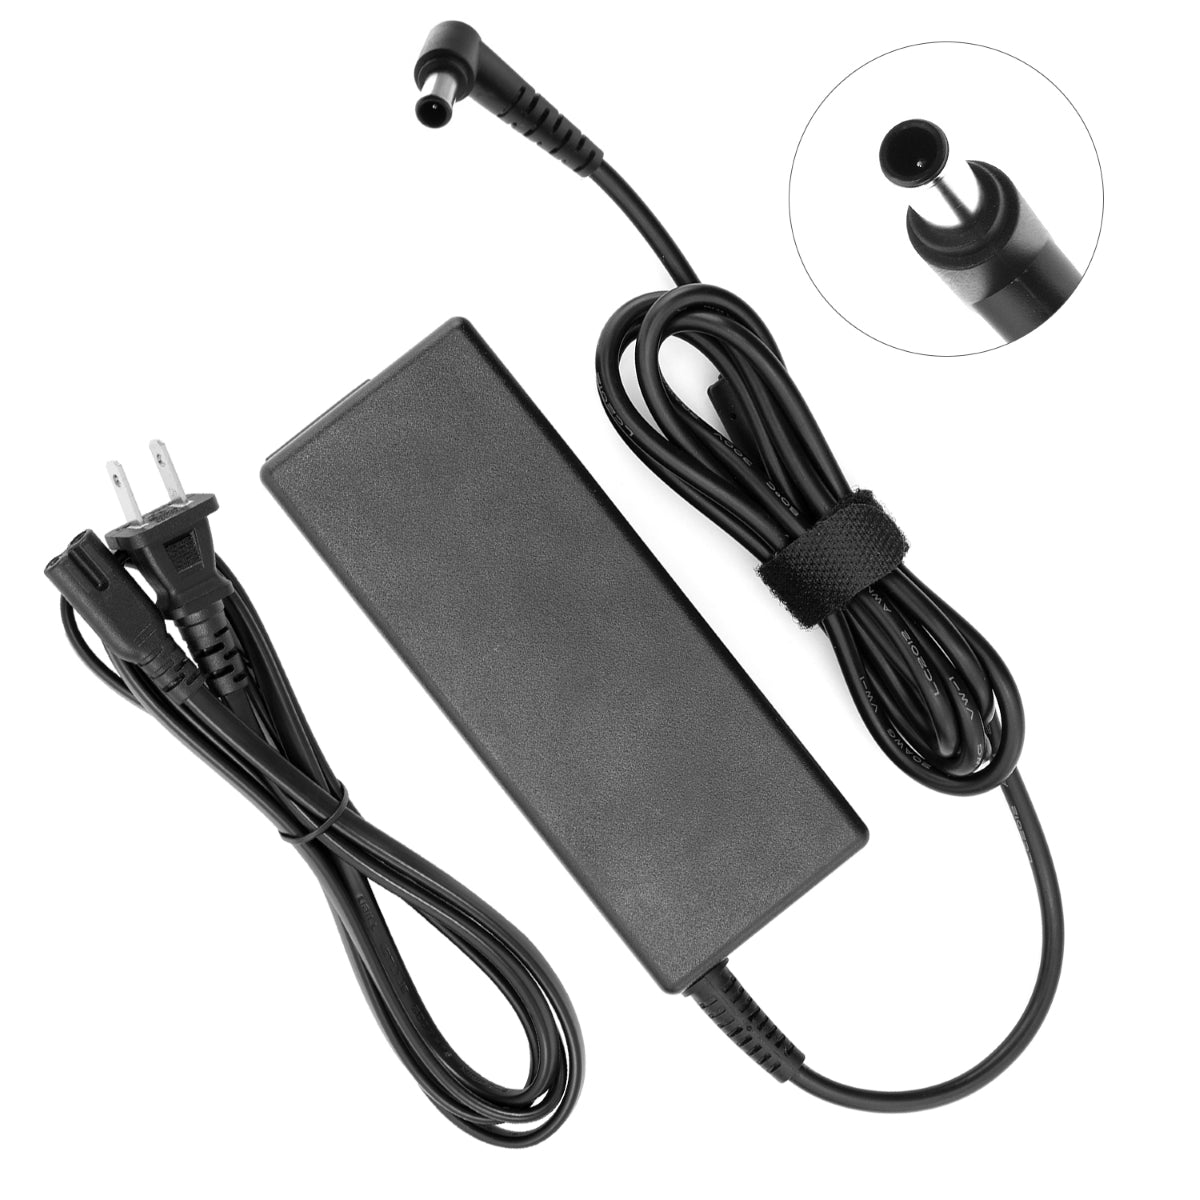 AC Adapter Power Supply for Samsung SyncMaster S20A350B Monitor